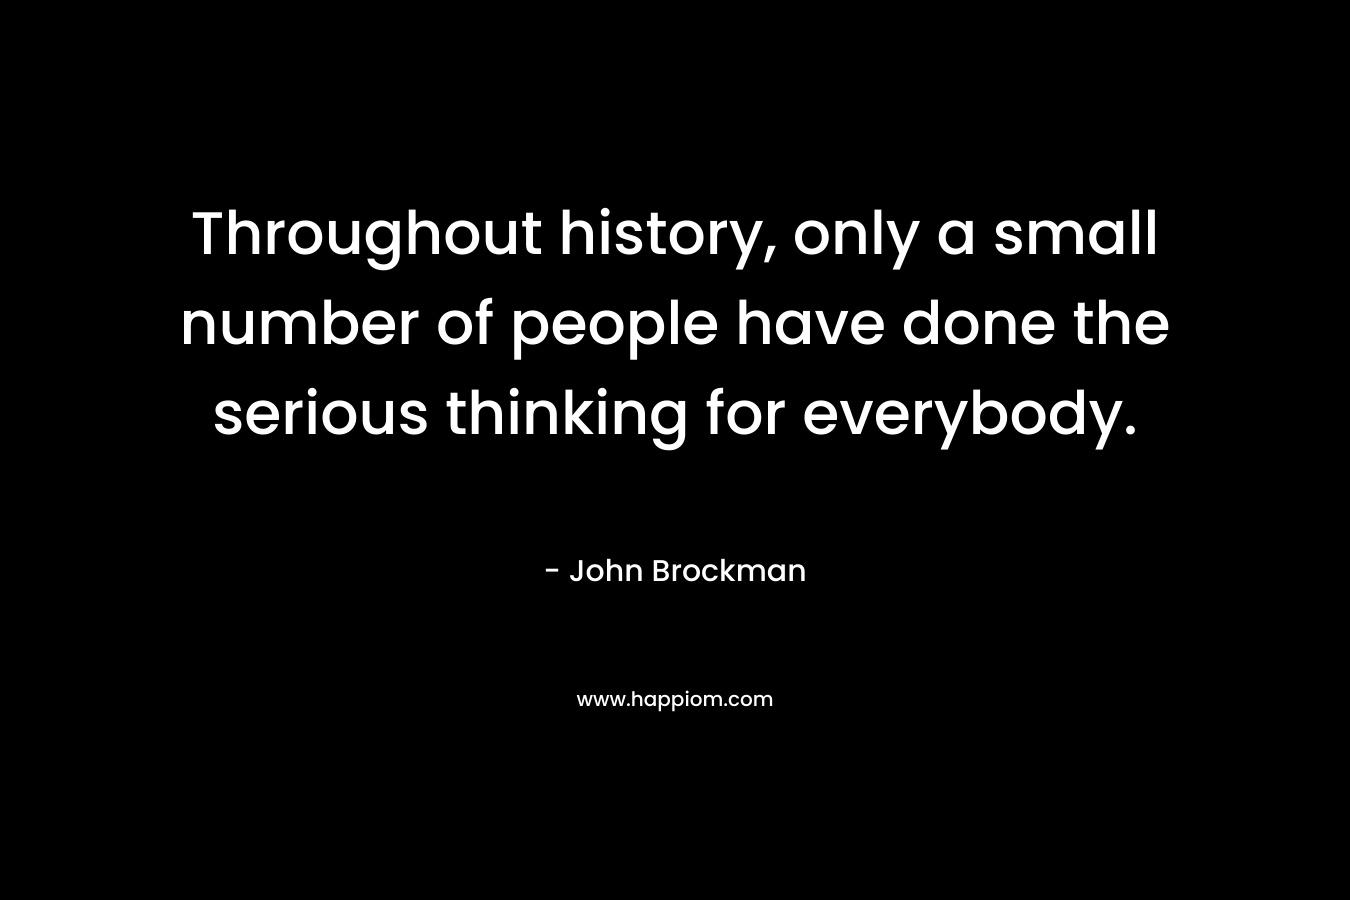 Throughout history, only a small number of people have done the serious thinking for everybody.